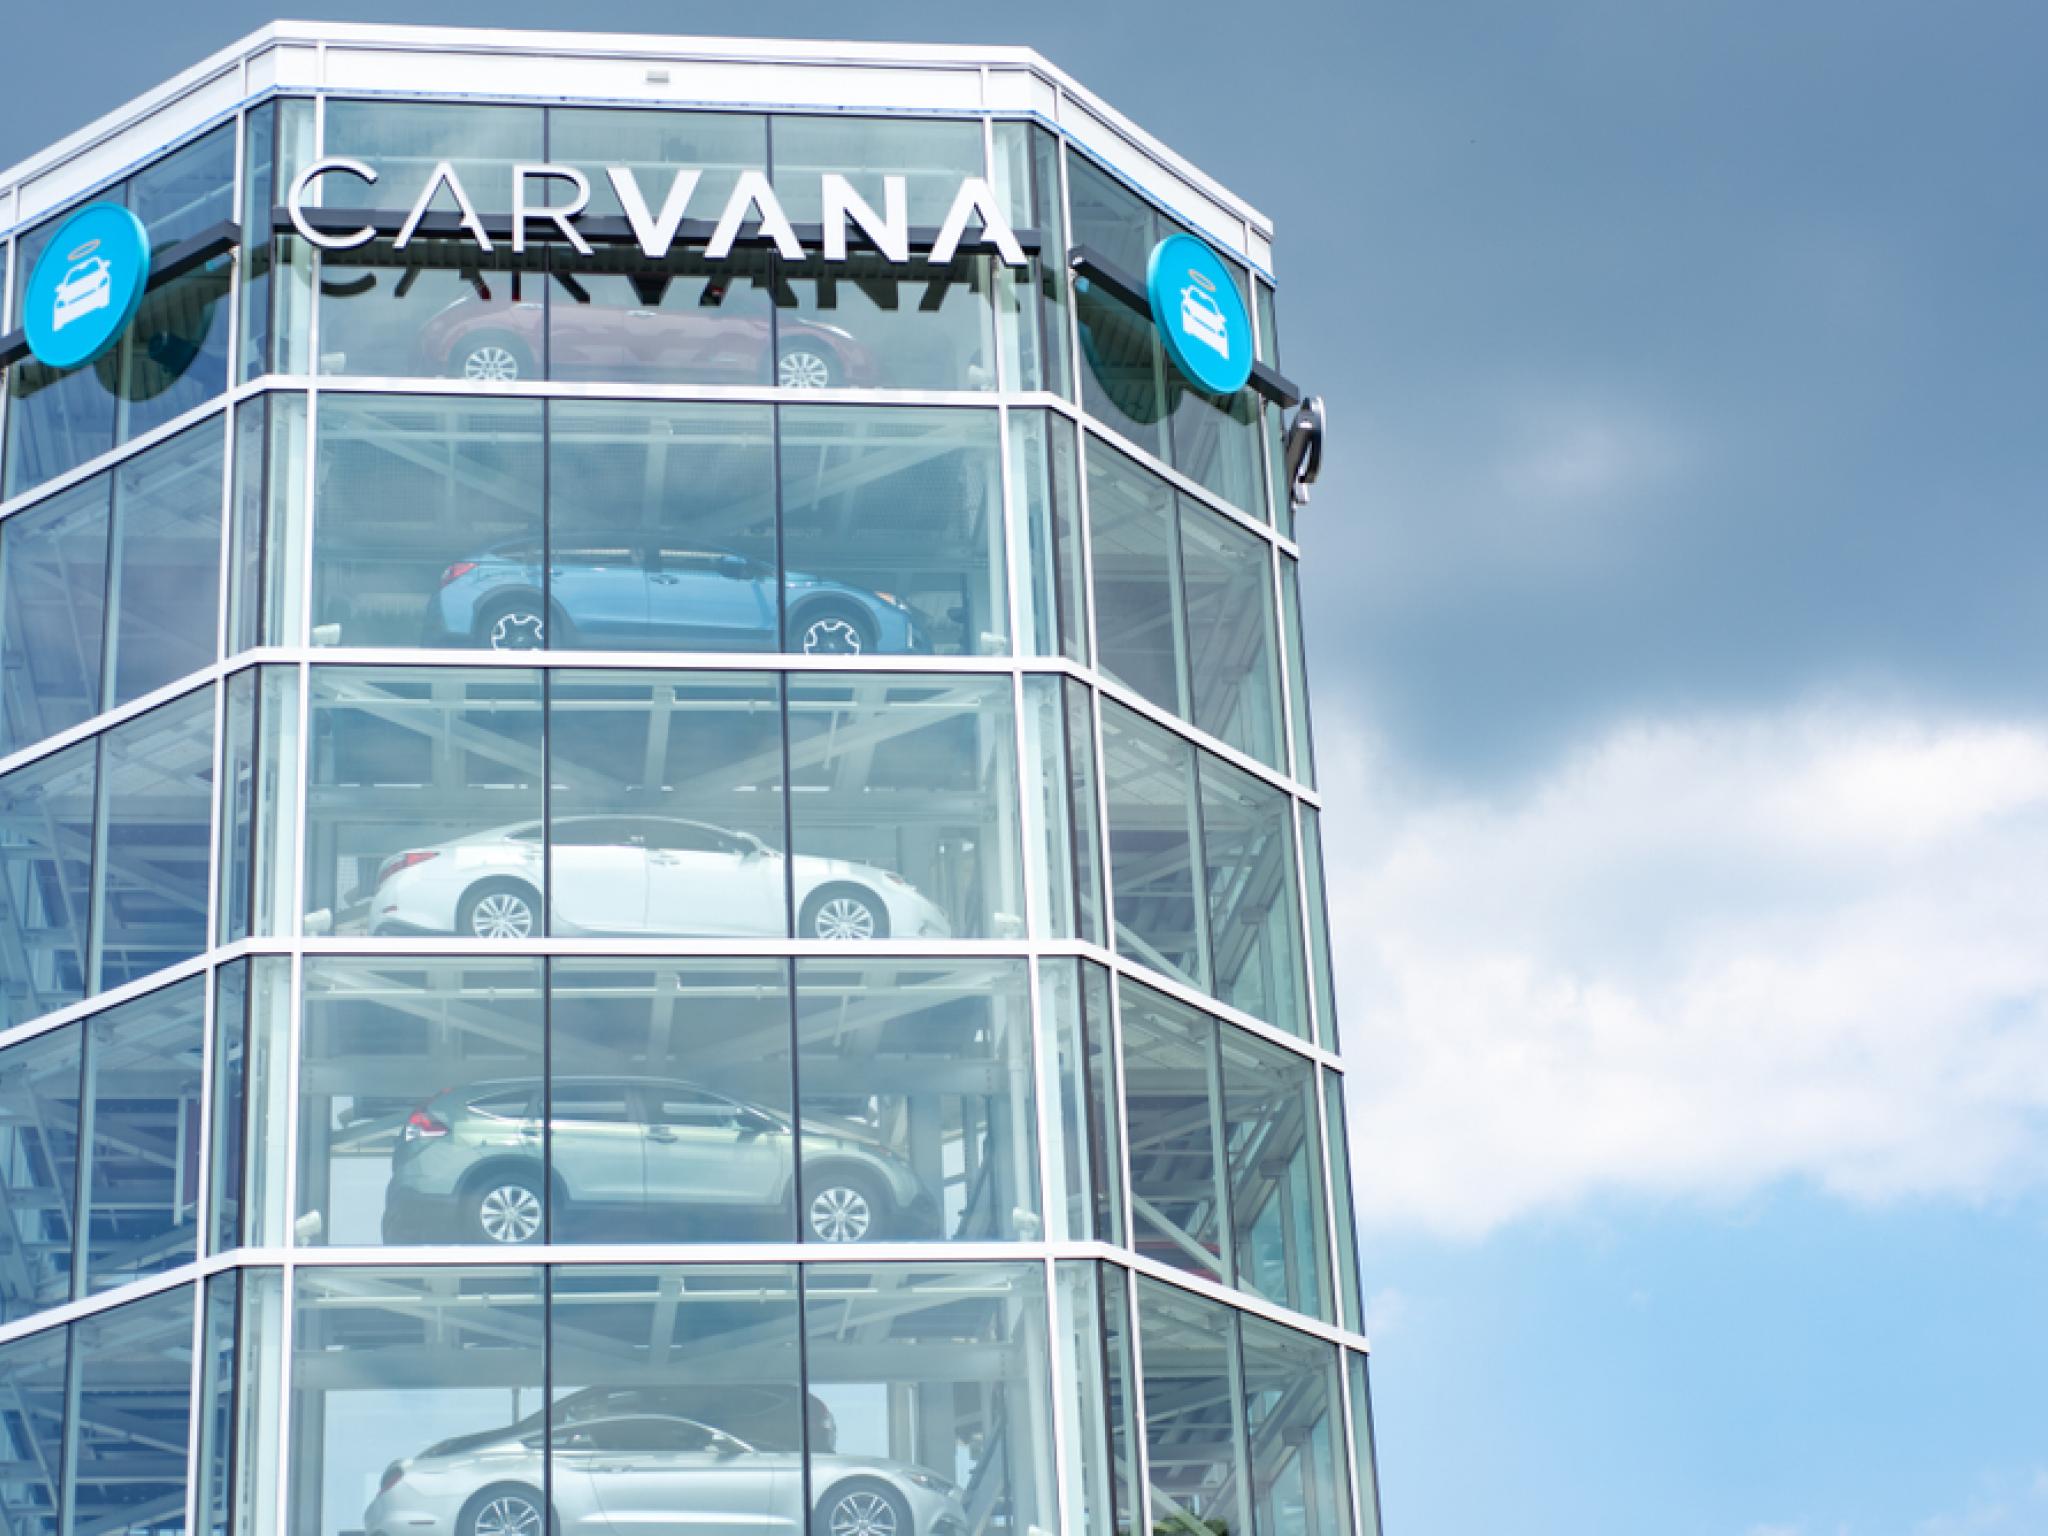  whats-going-on-with-carvana-stock-wednesday 